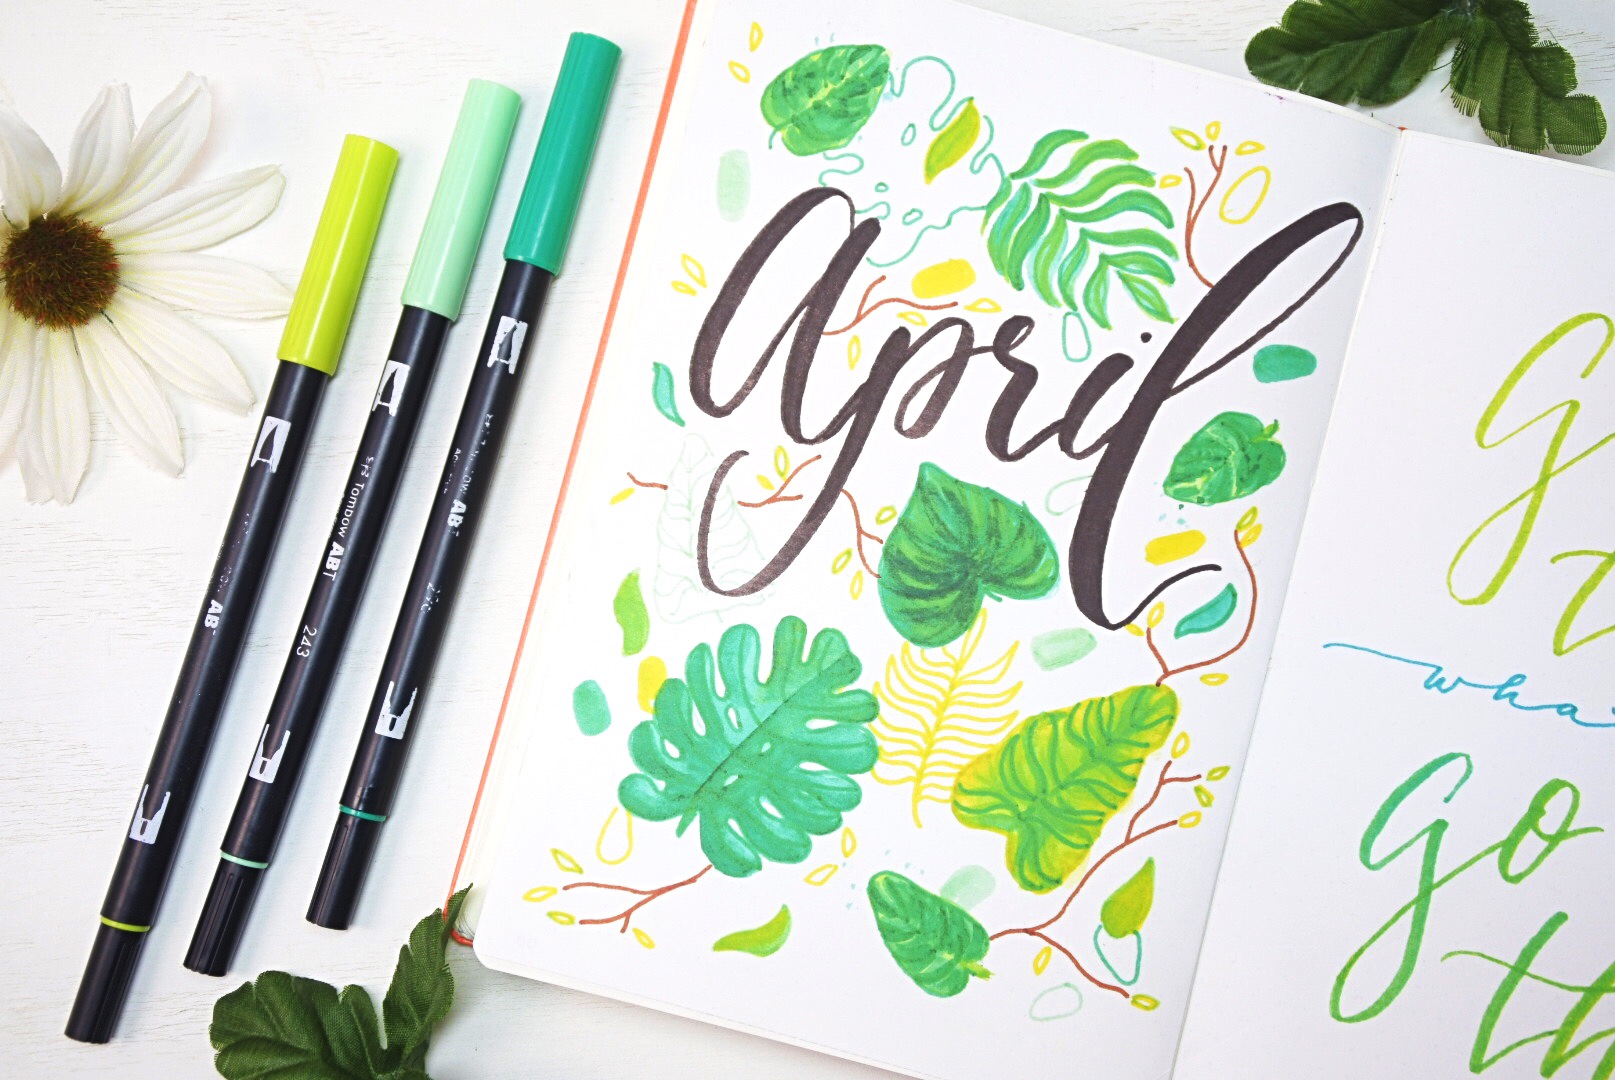 Bullet Journal Printable Templates for April 2021 ⋆ Sheena of the Journal